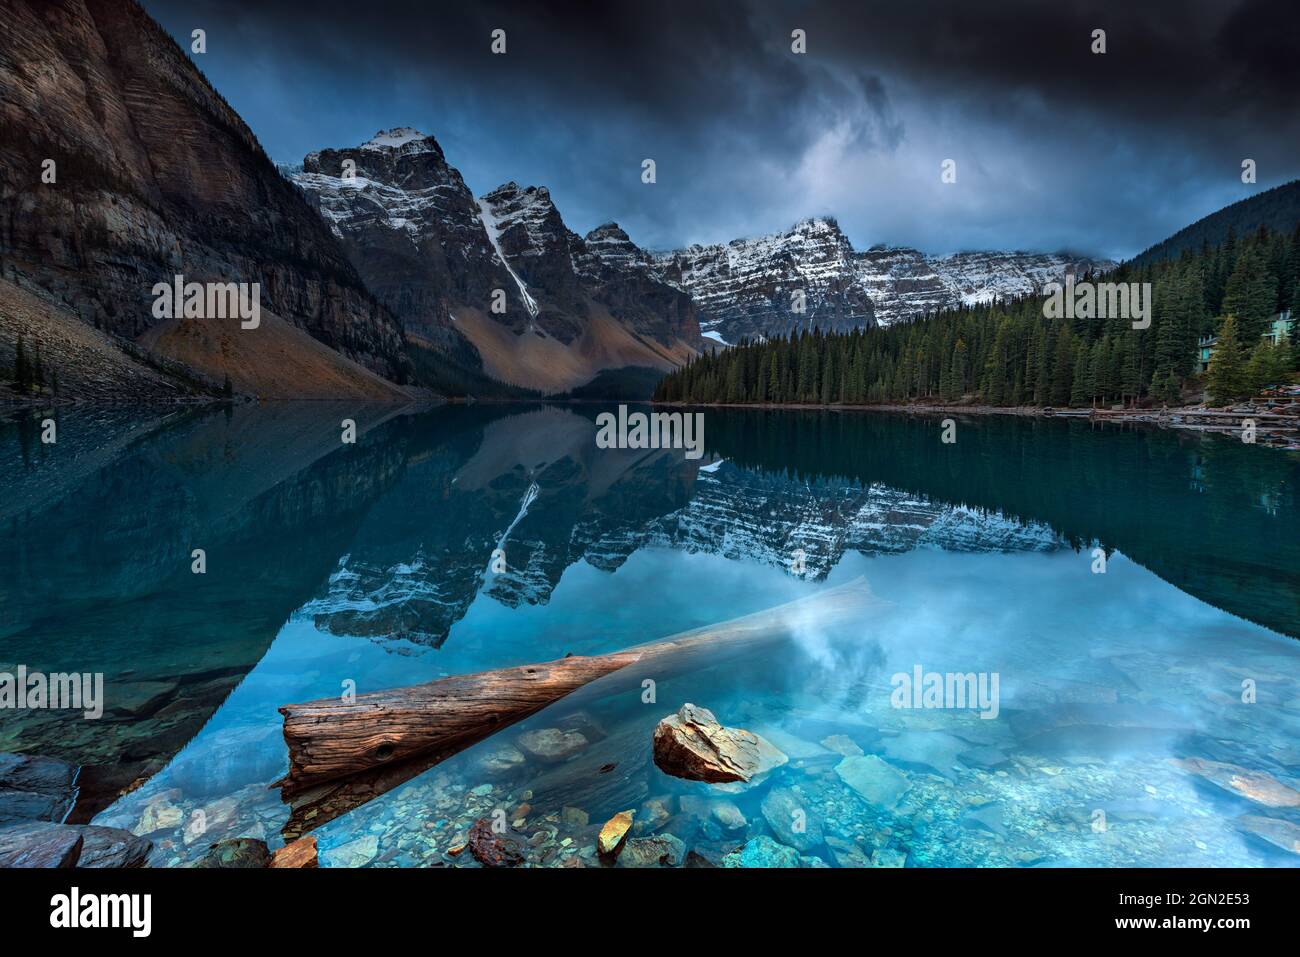 CANADA, ALBERTA, BANFF PARK, MORAINE LAKE. TREE TRUNK FLOATING IN THE LAKE WITH A VIEW OF THE MAJESTIC PEAKS OF THE CANADIAN ROCKIES UNDER A STORMY SK Stock Photo